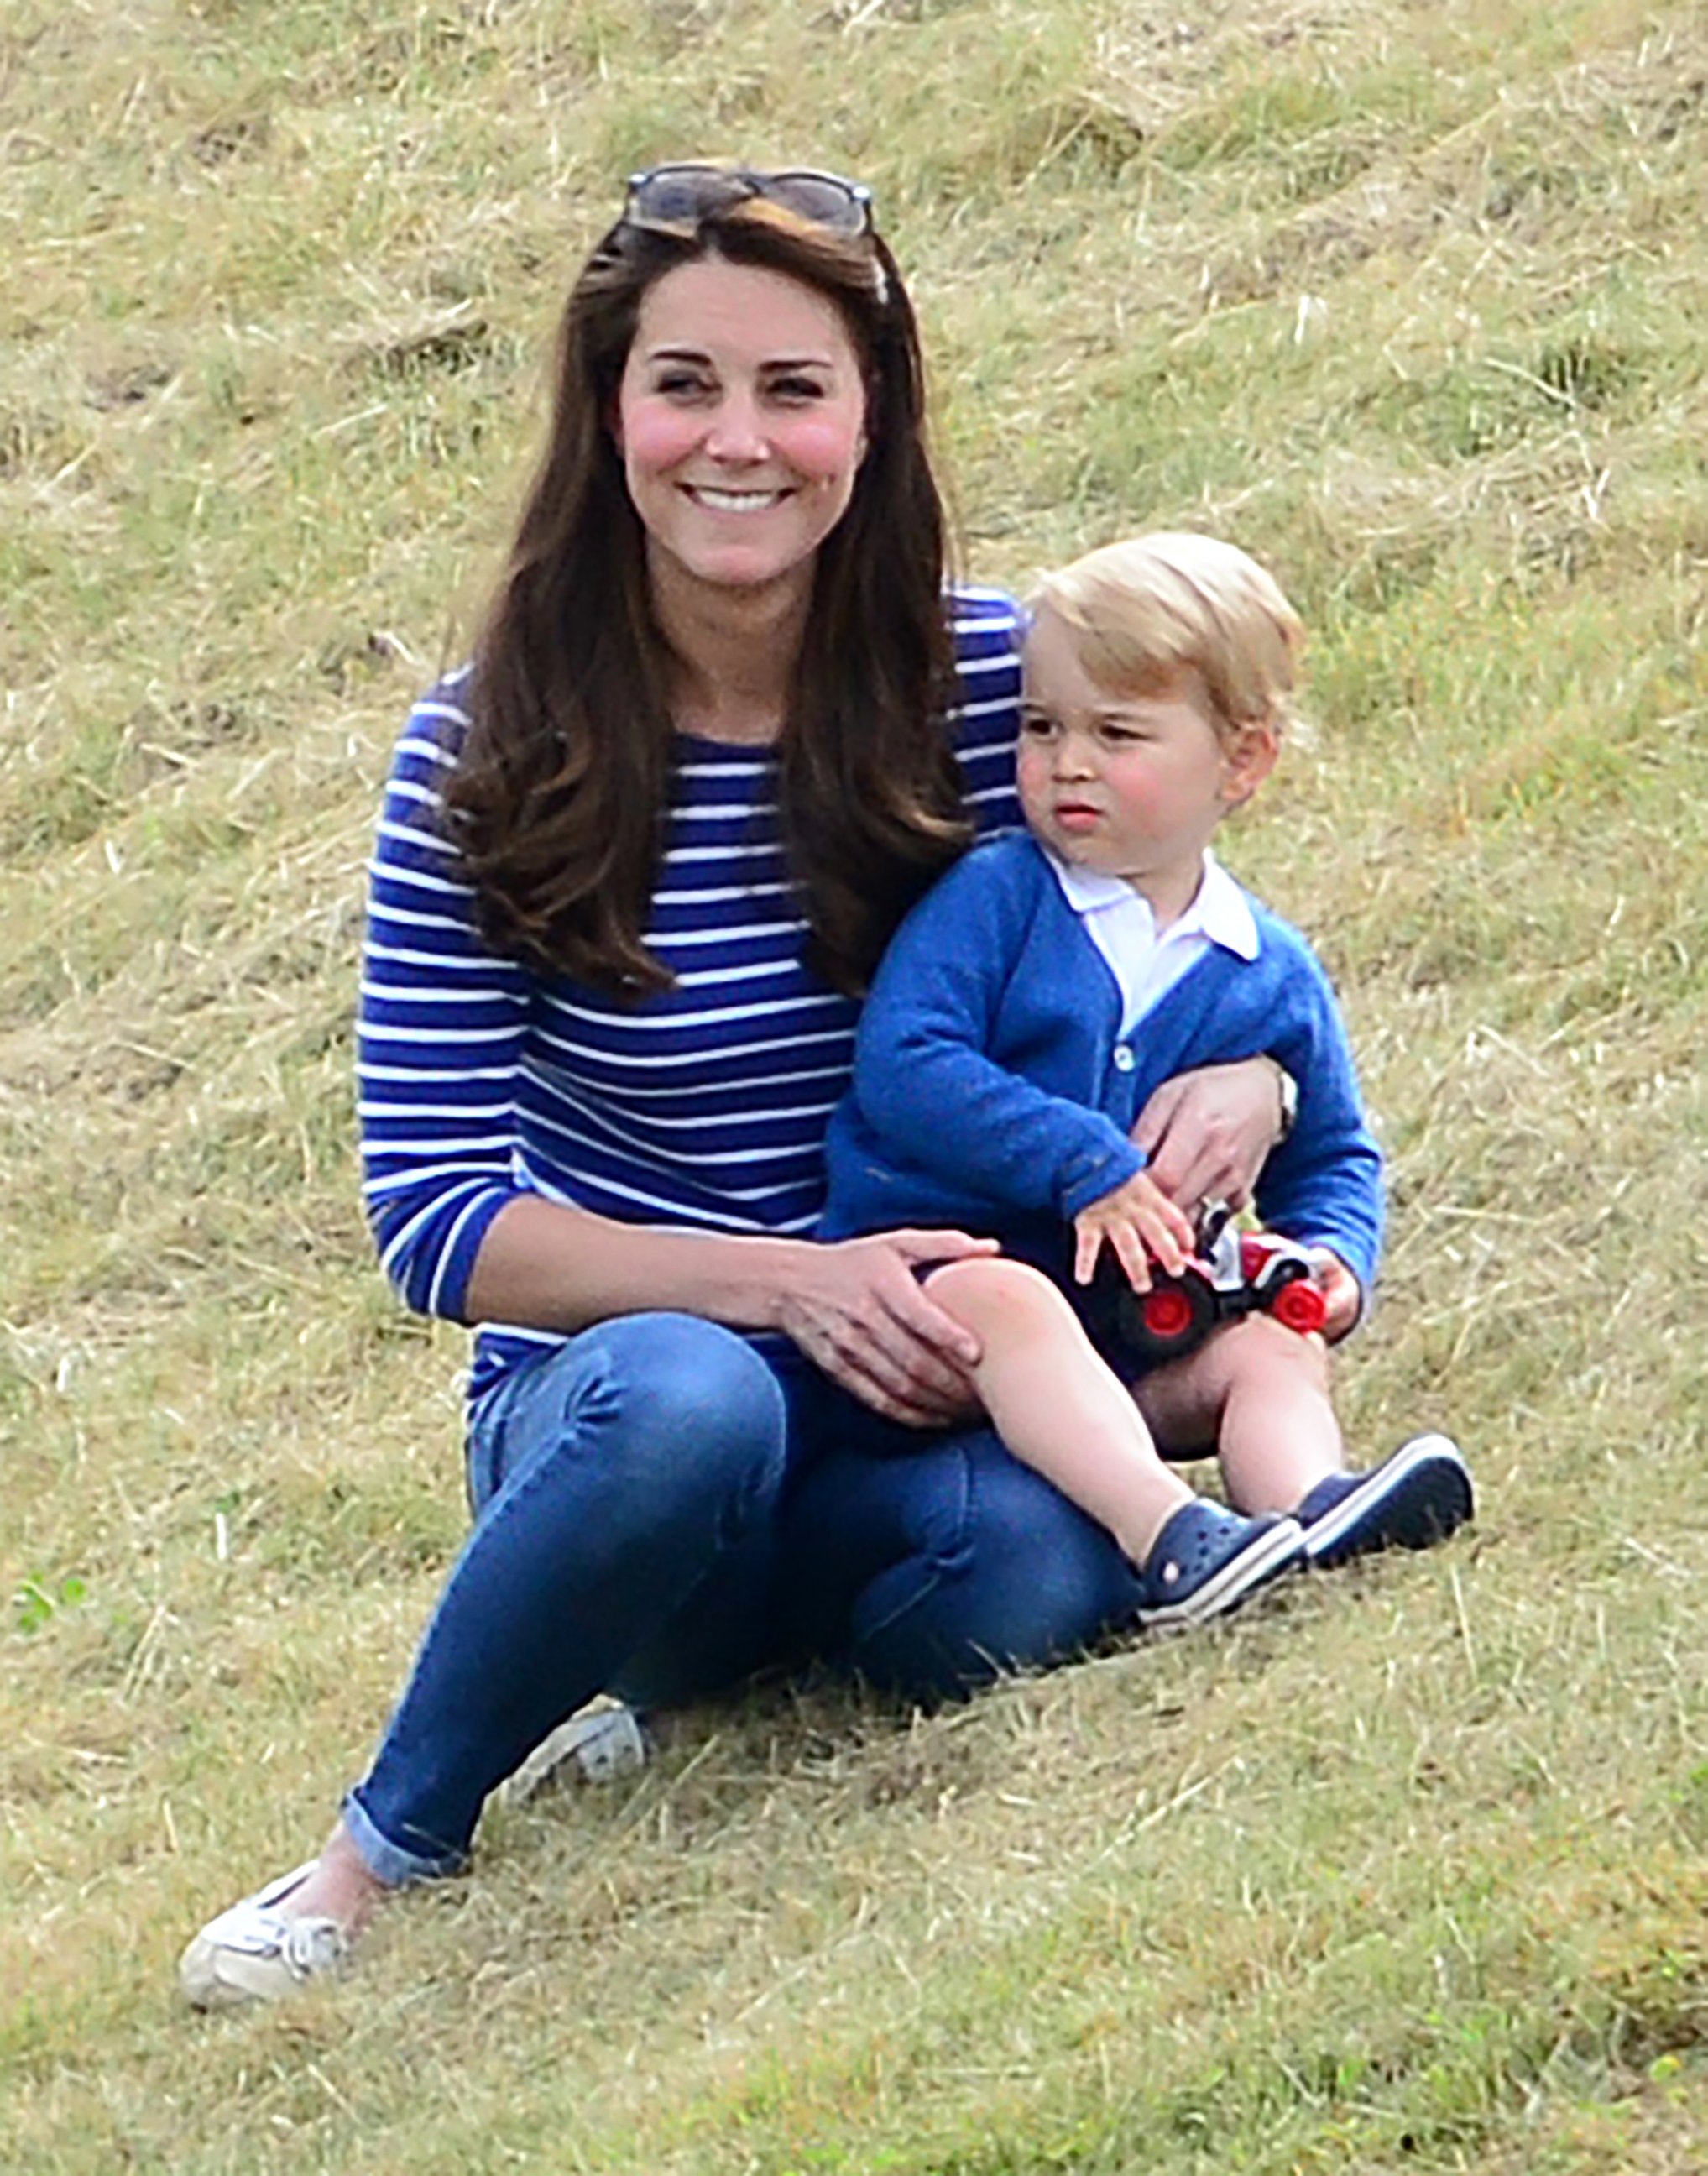 PHOTO: Prince George attends his father's polo match in Gloucestershire, United Kingdom, on June 14, 2015.